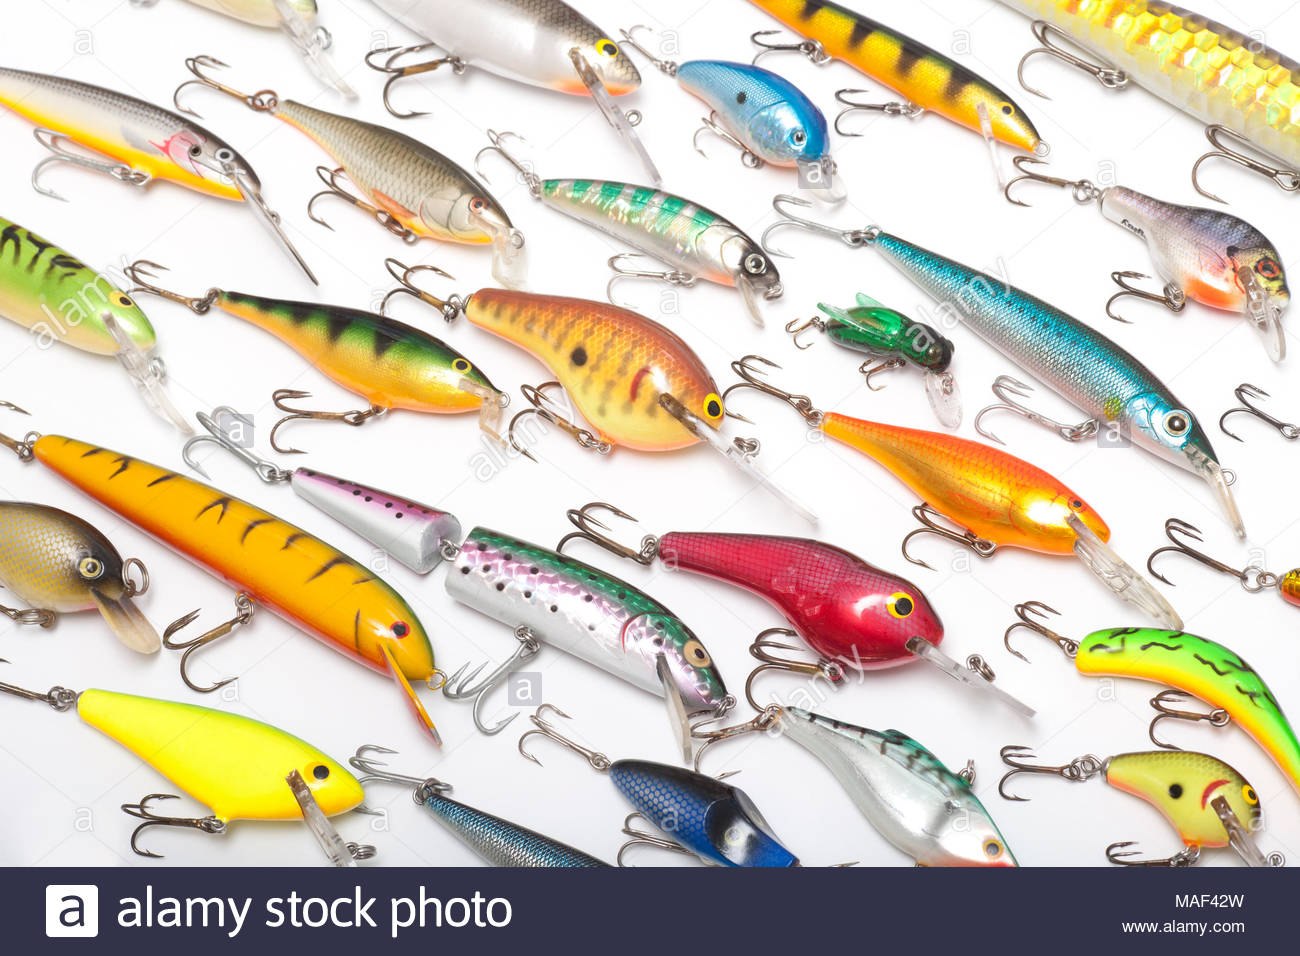 A Collection Of Modern Fishing Lures Also Known As Plugs For